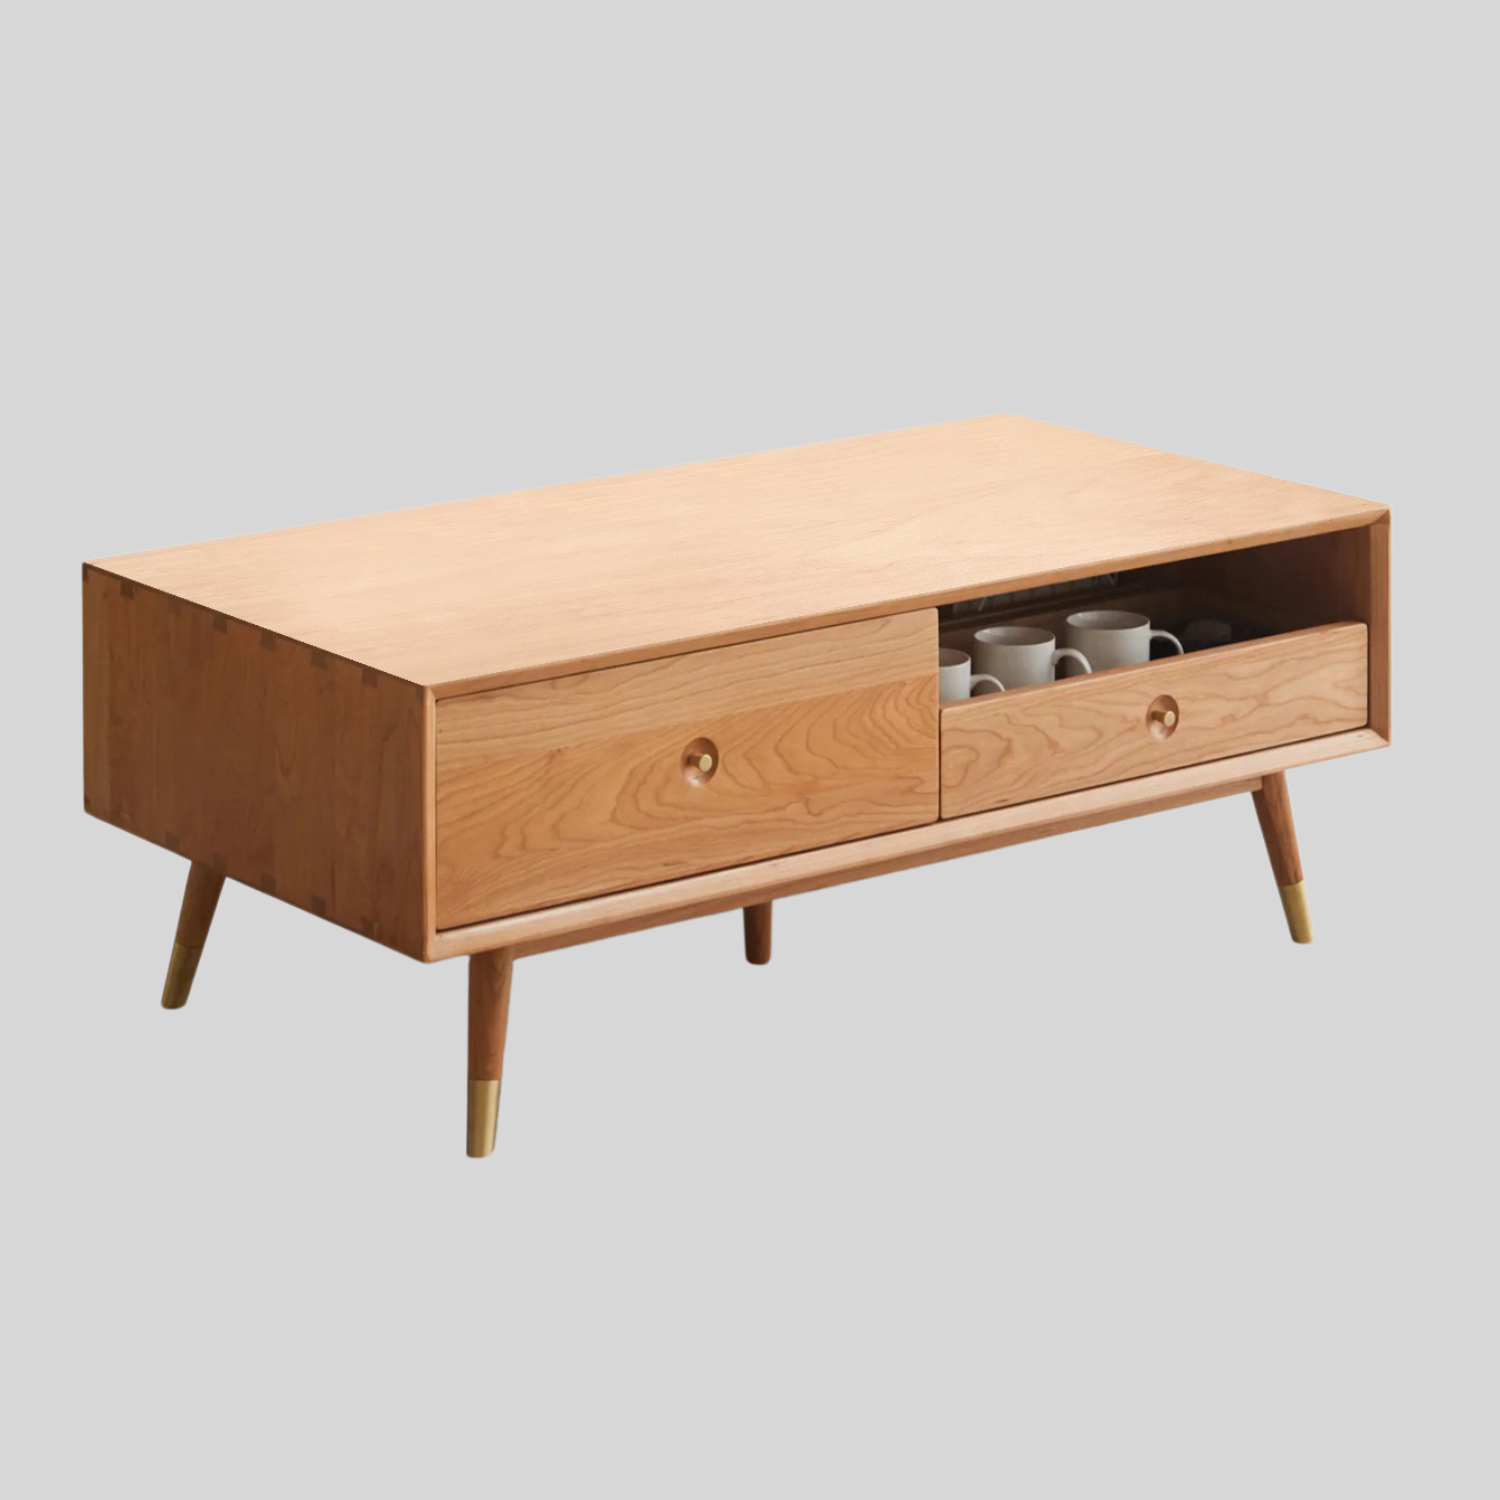 Kleiven Cherry Wood Coffee Table